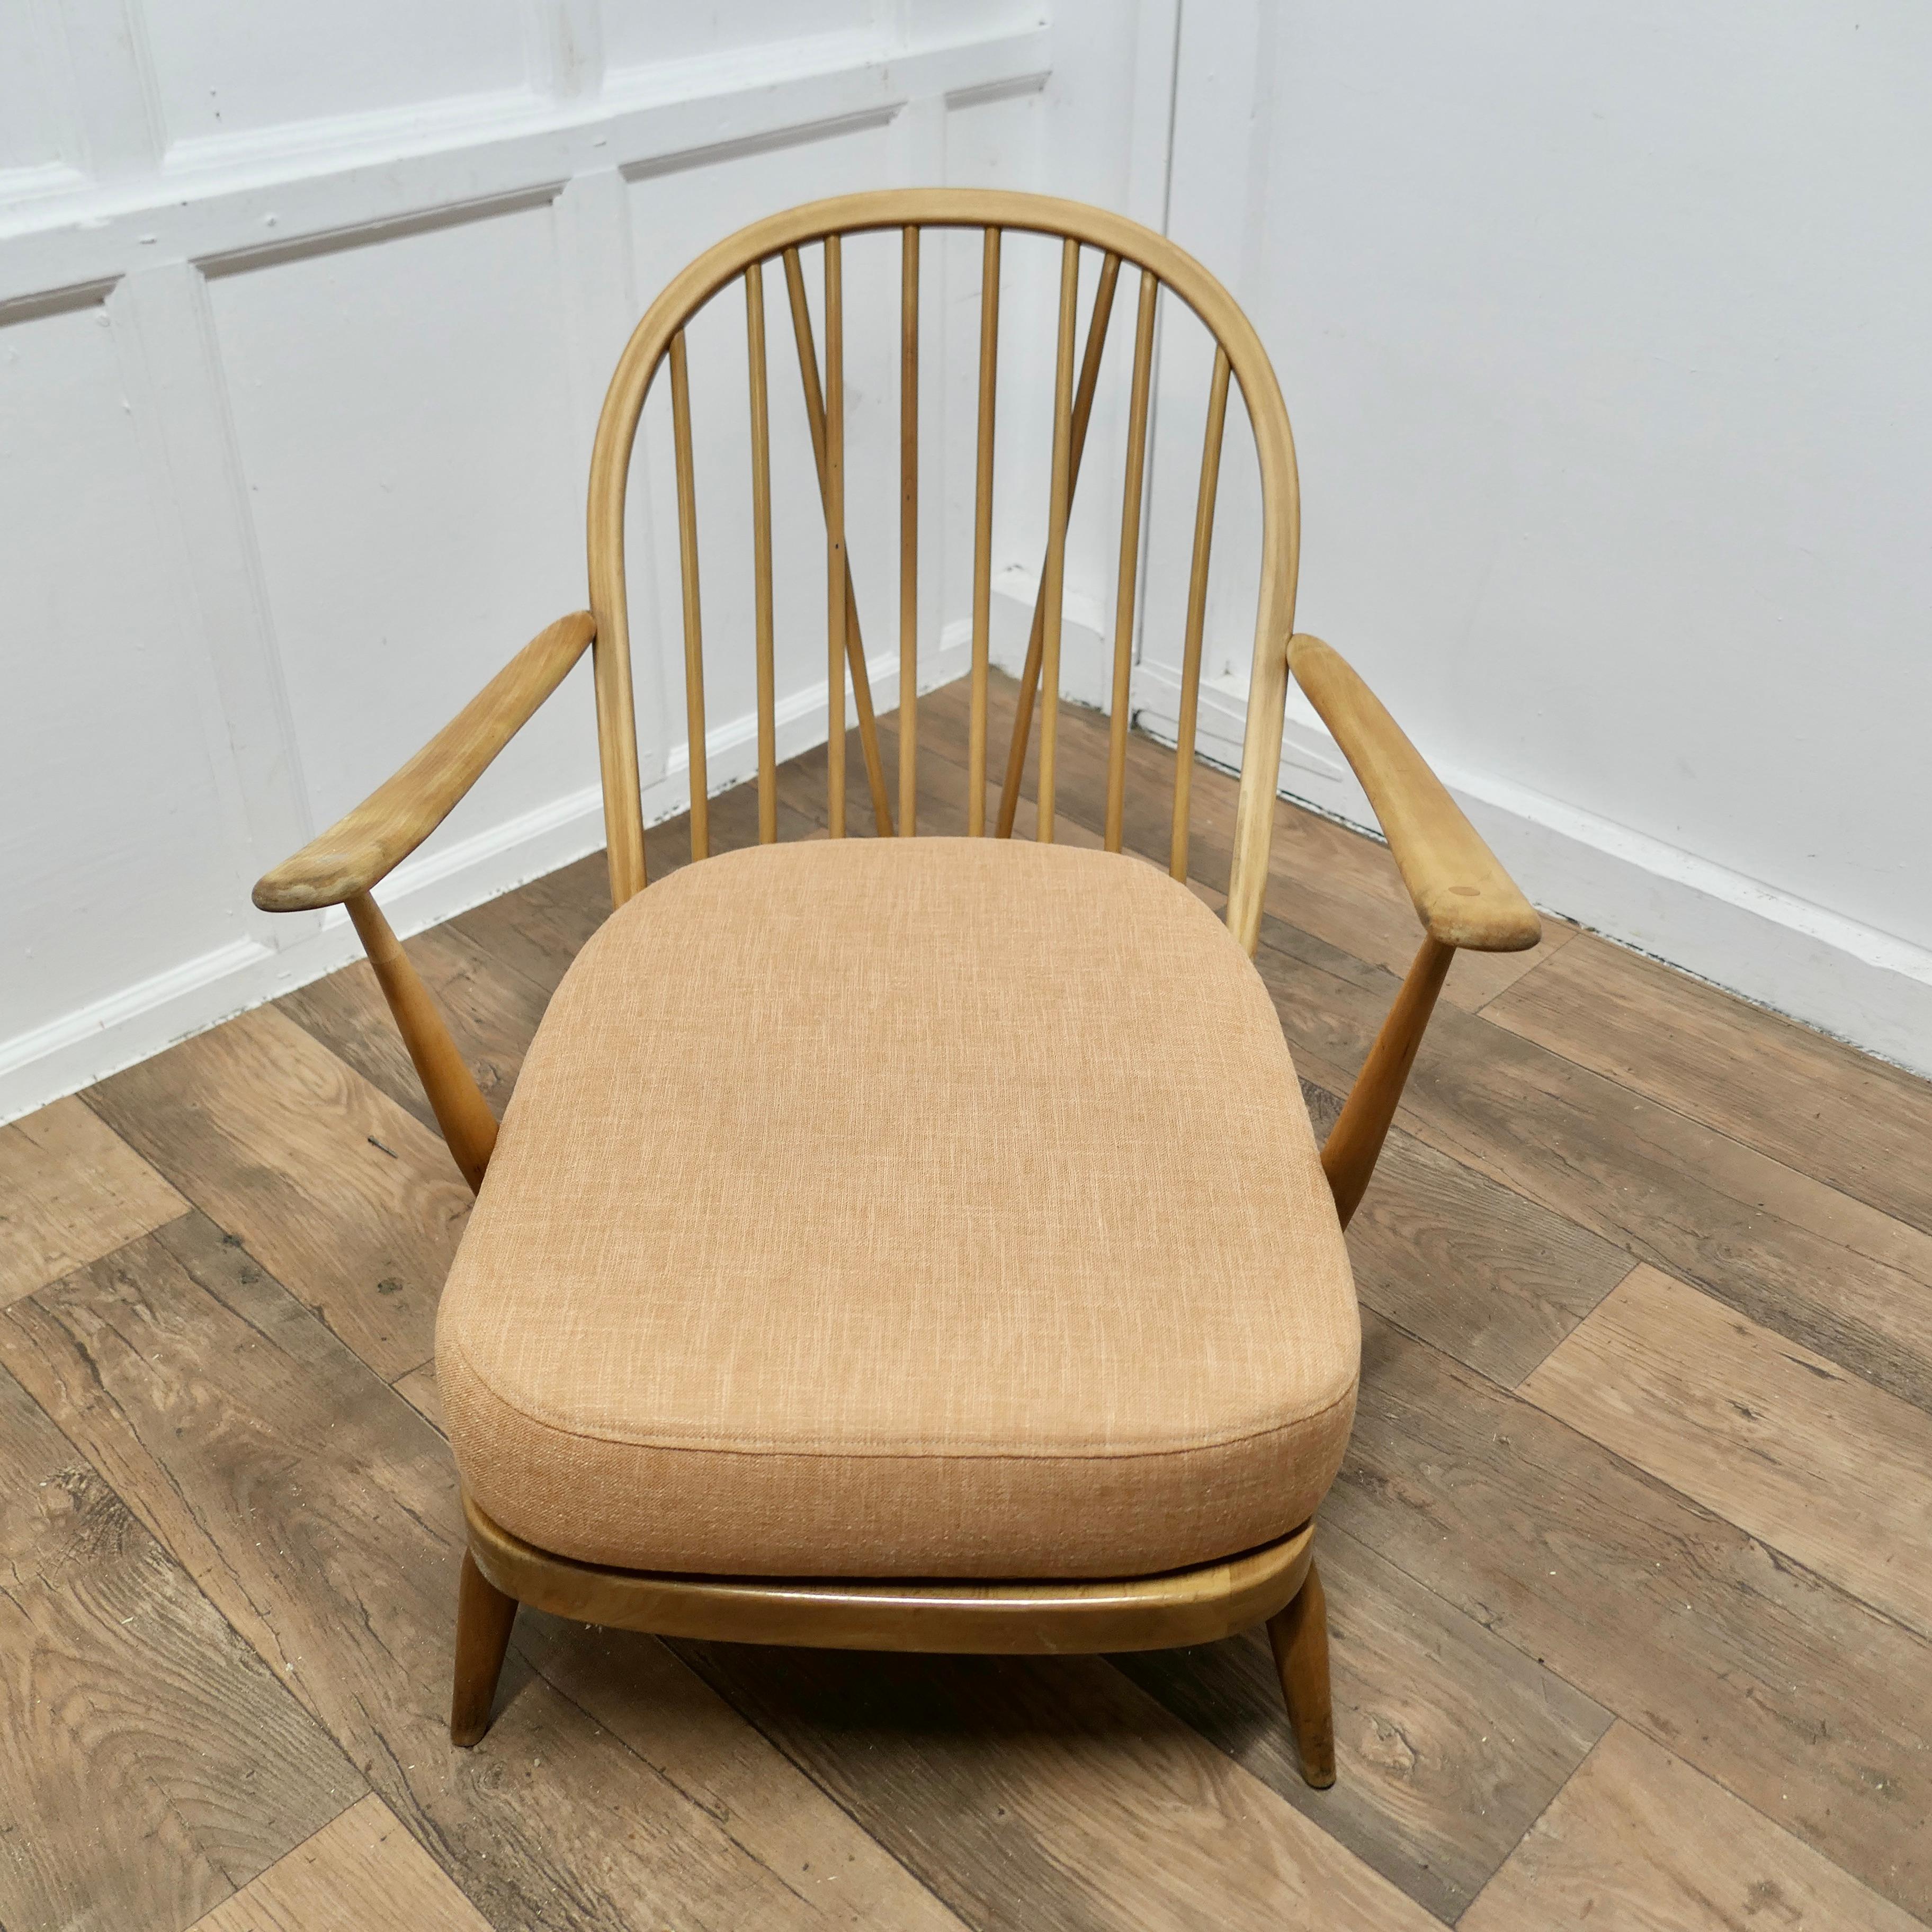 Ercol Windsor Easy Chair   The chair is a classic design and traditionally made  In Good Condition For Sale In Chillerton, Isle of Wight